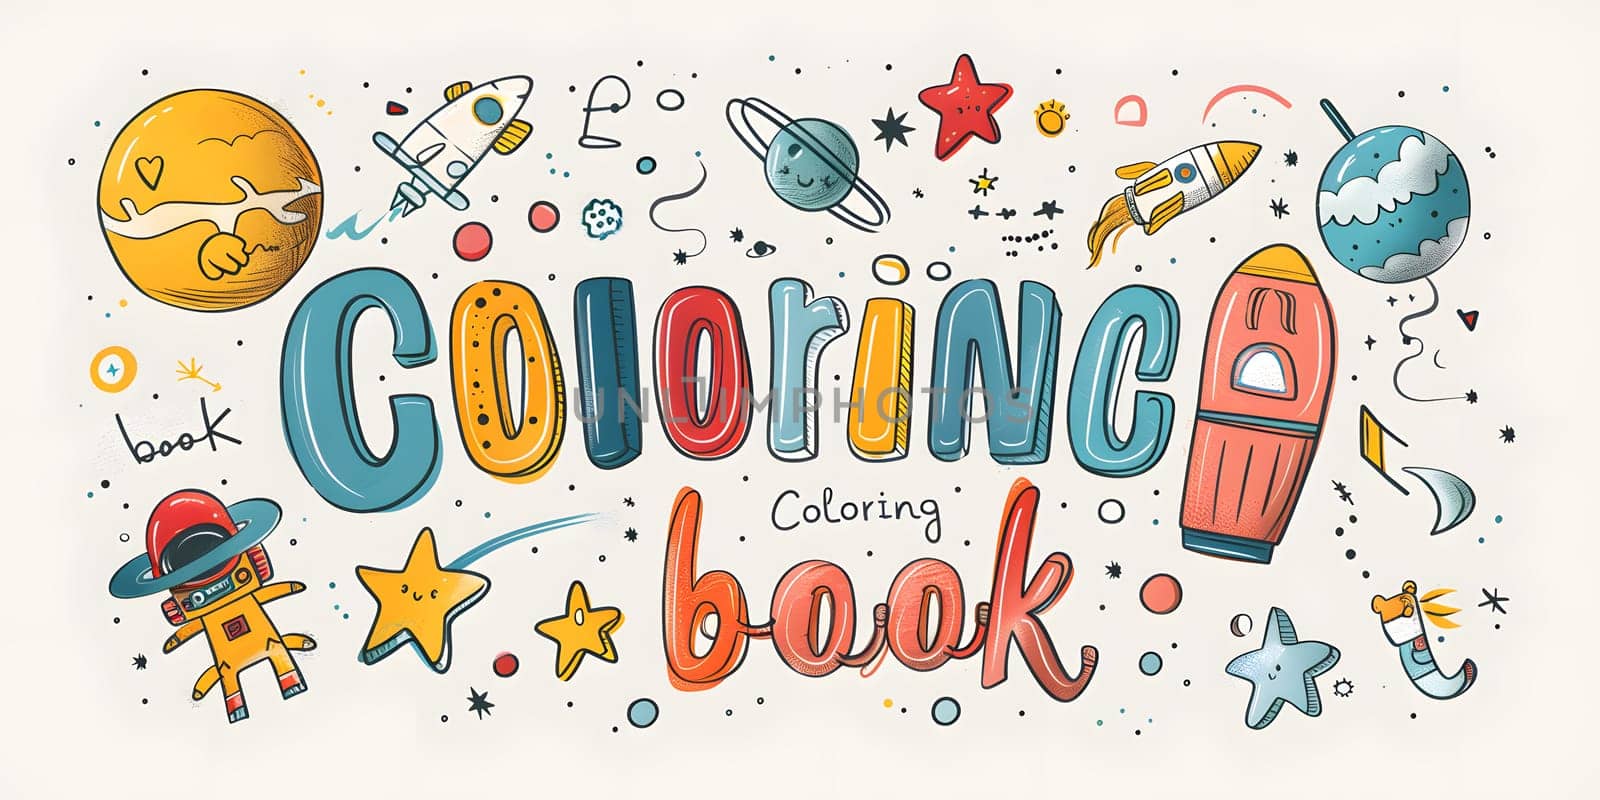 A vibrant logo featuring spacethemed illustrations, designed in a colorful palette to spark creativity. Perfect for a coloring book highlighting outer space